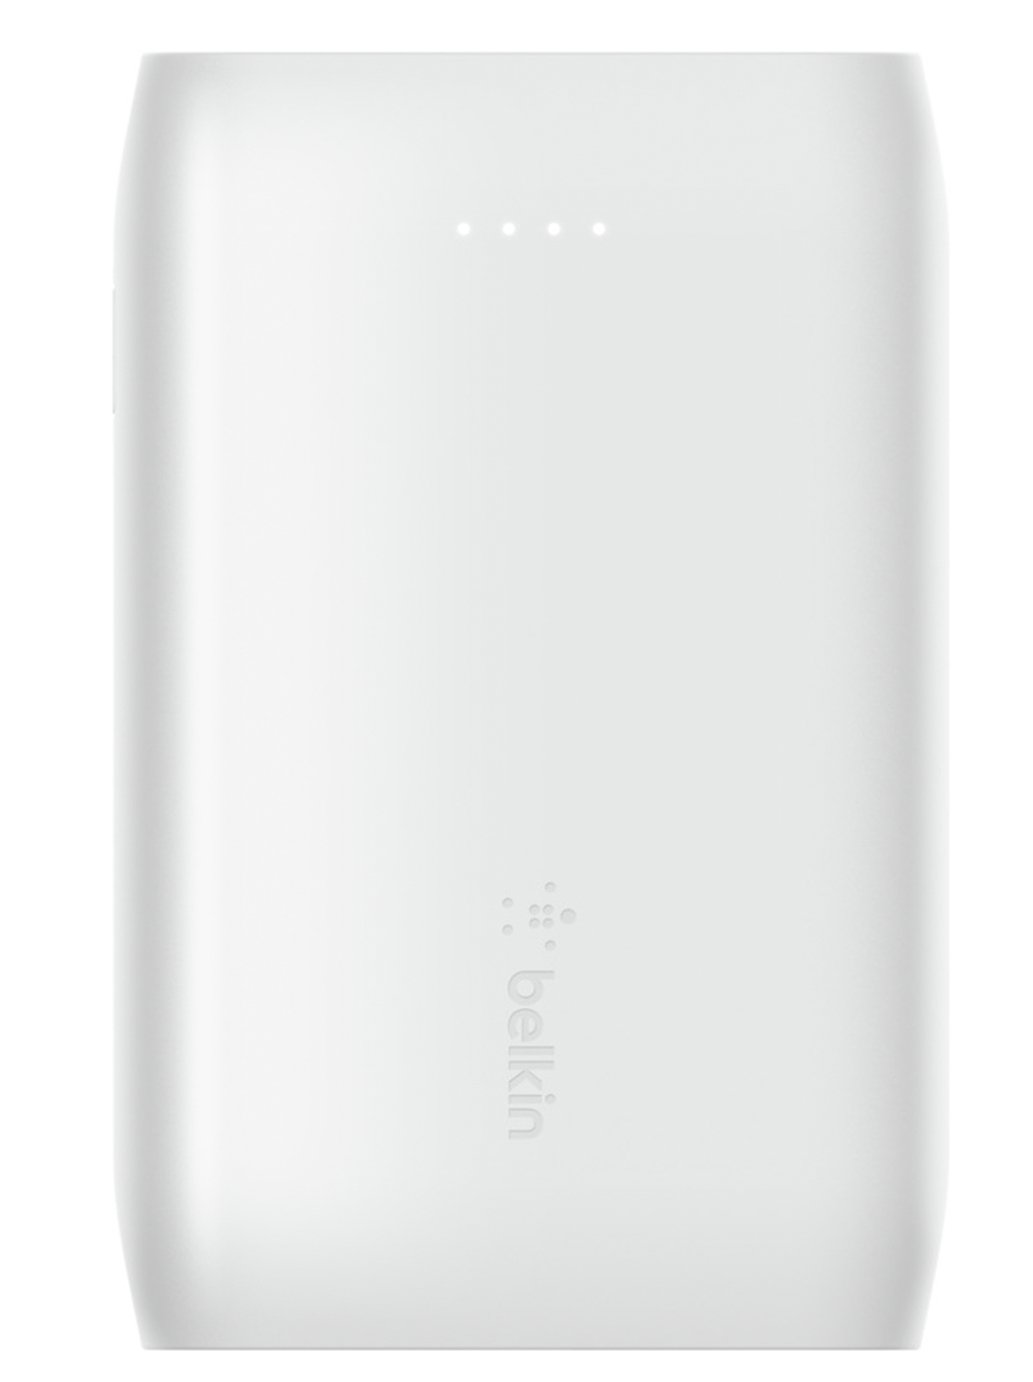 Belkin 10000mAh Power Bank Pre Charged Review